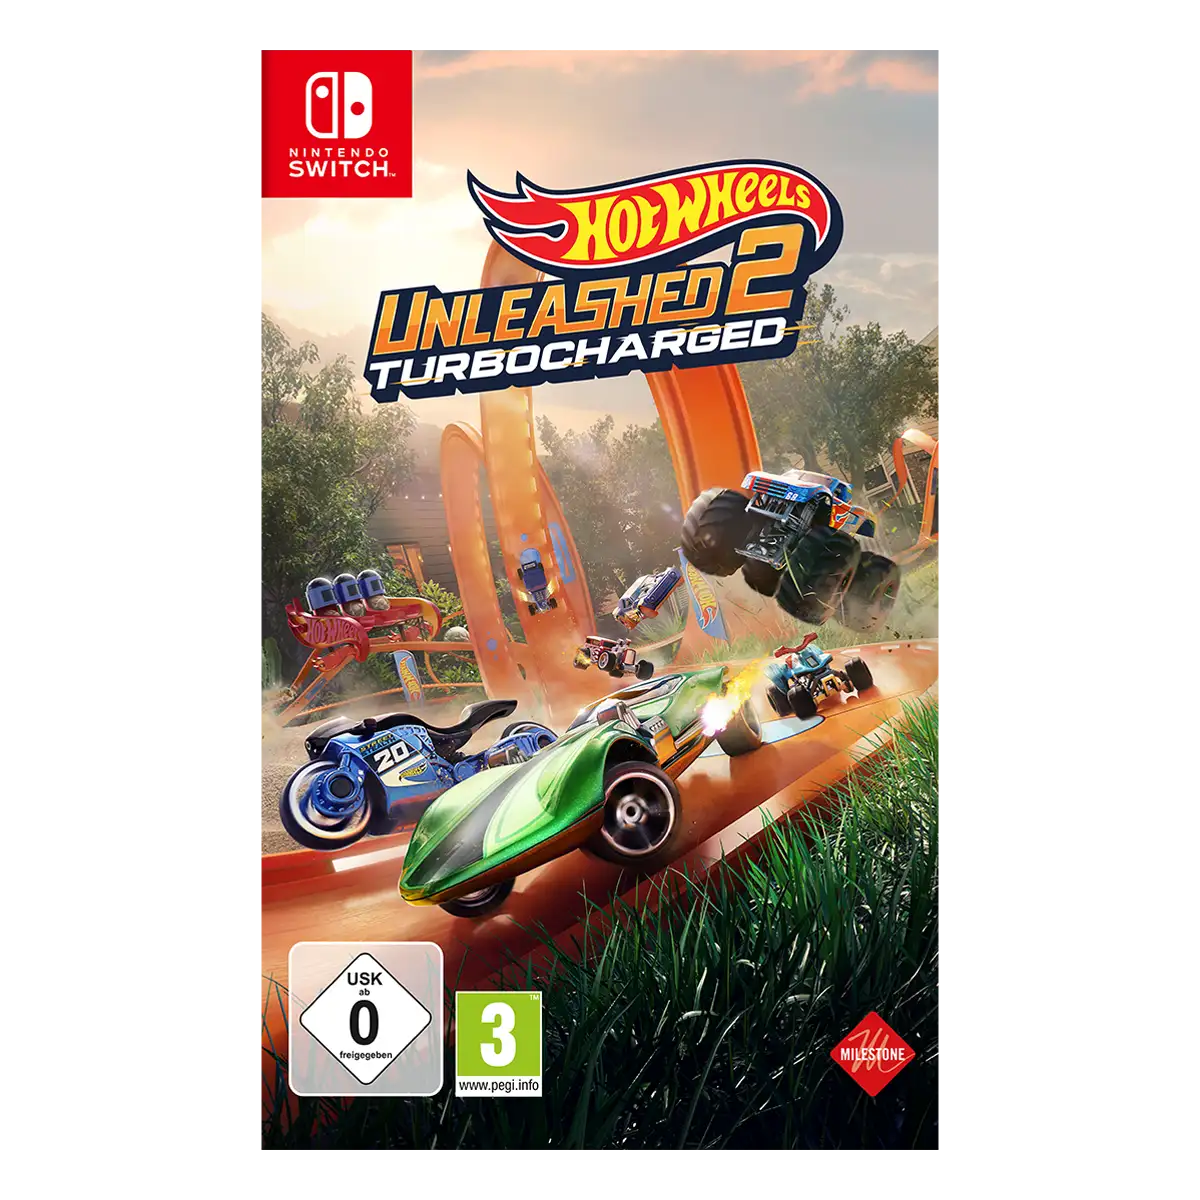 Hot Wheels Unleashed™ 2 Turbocharged (Switch) Cover